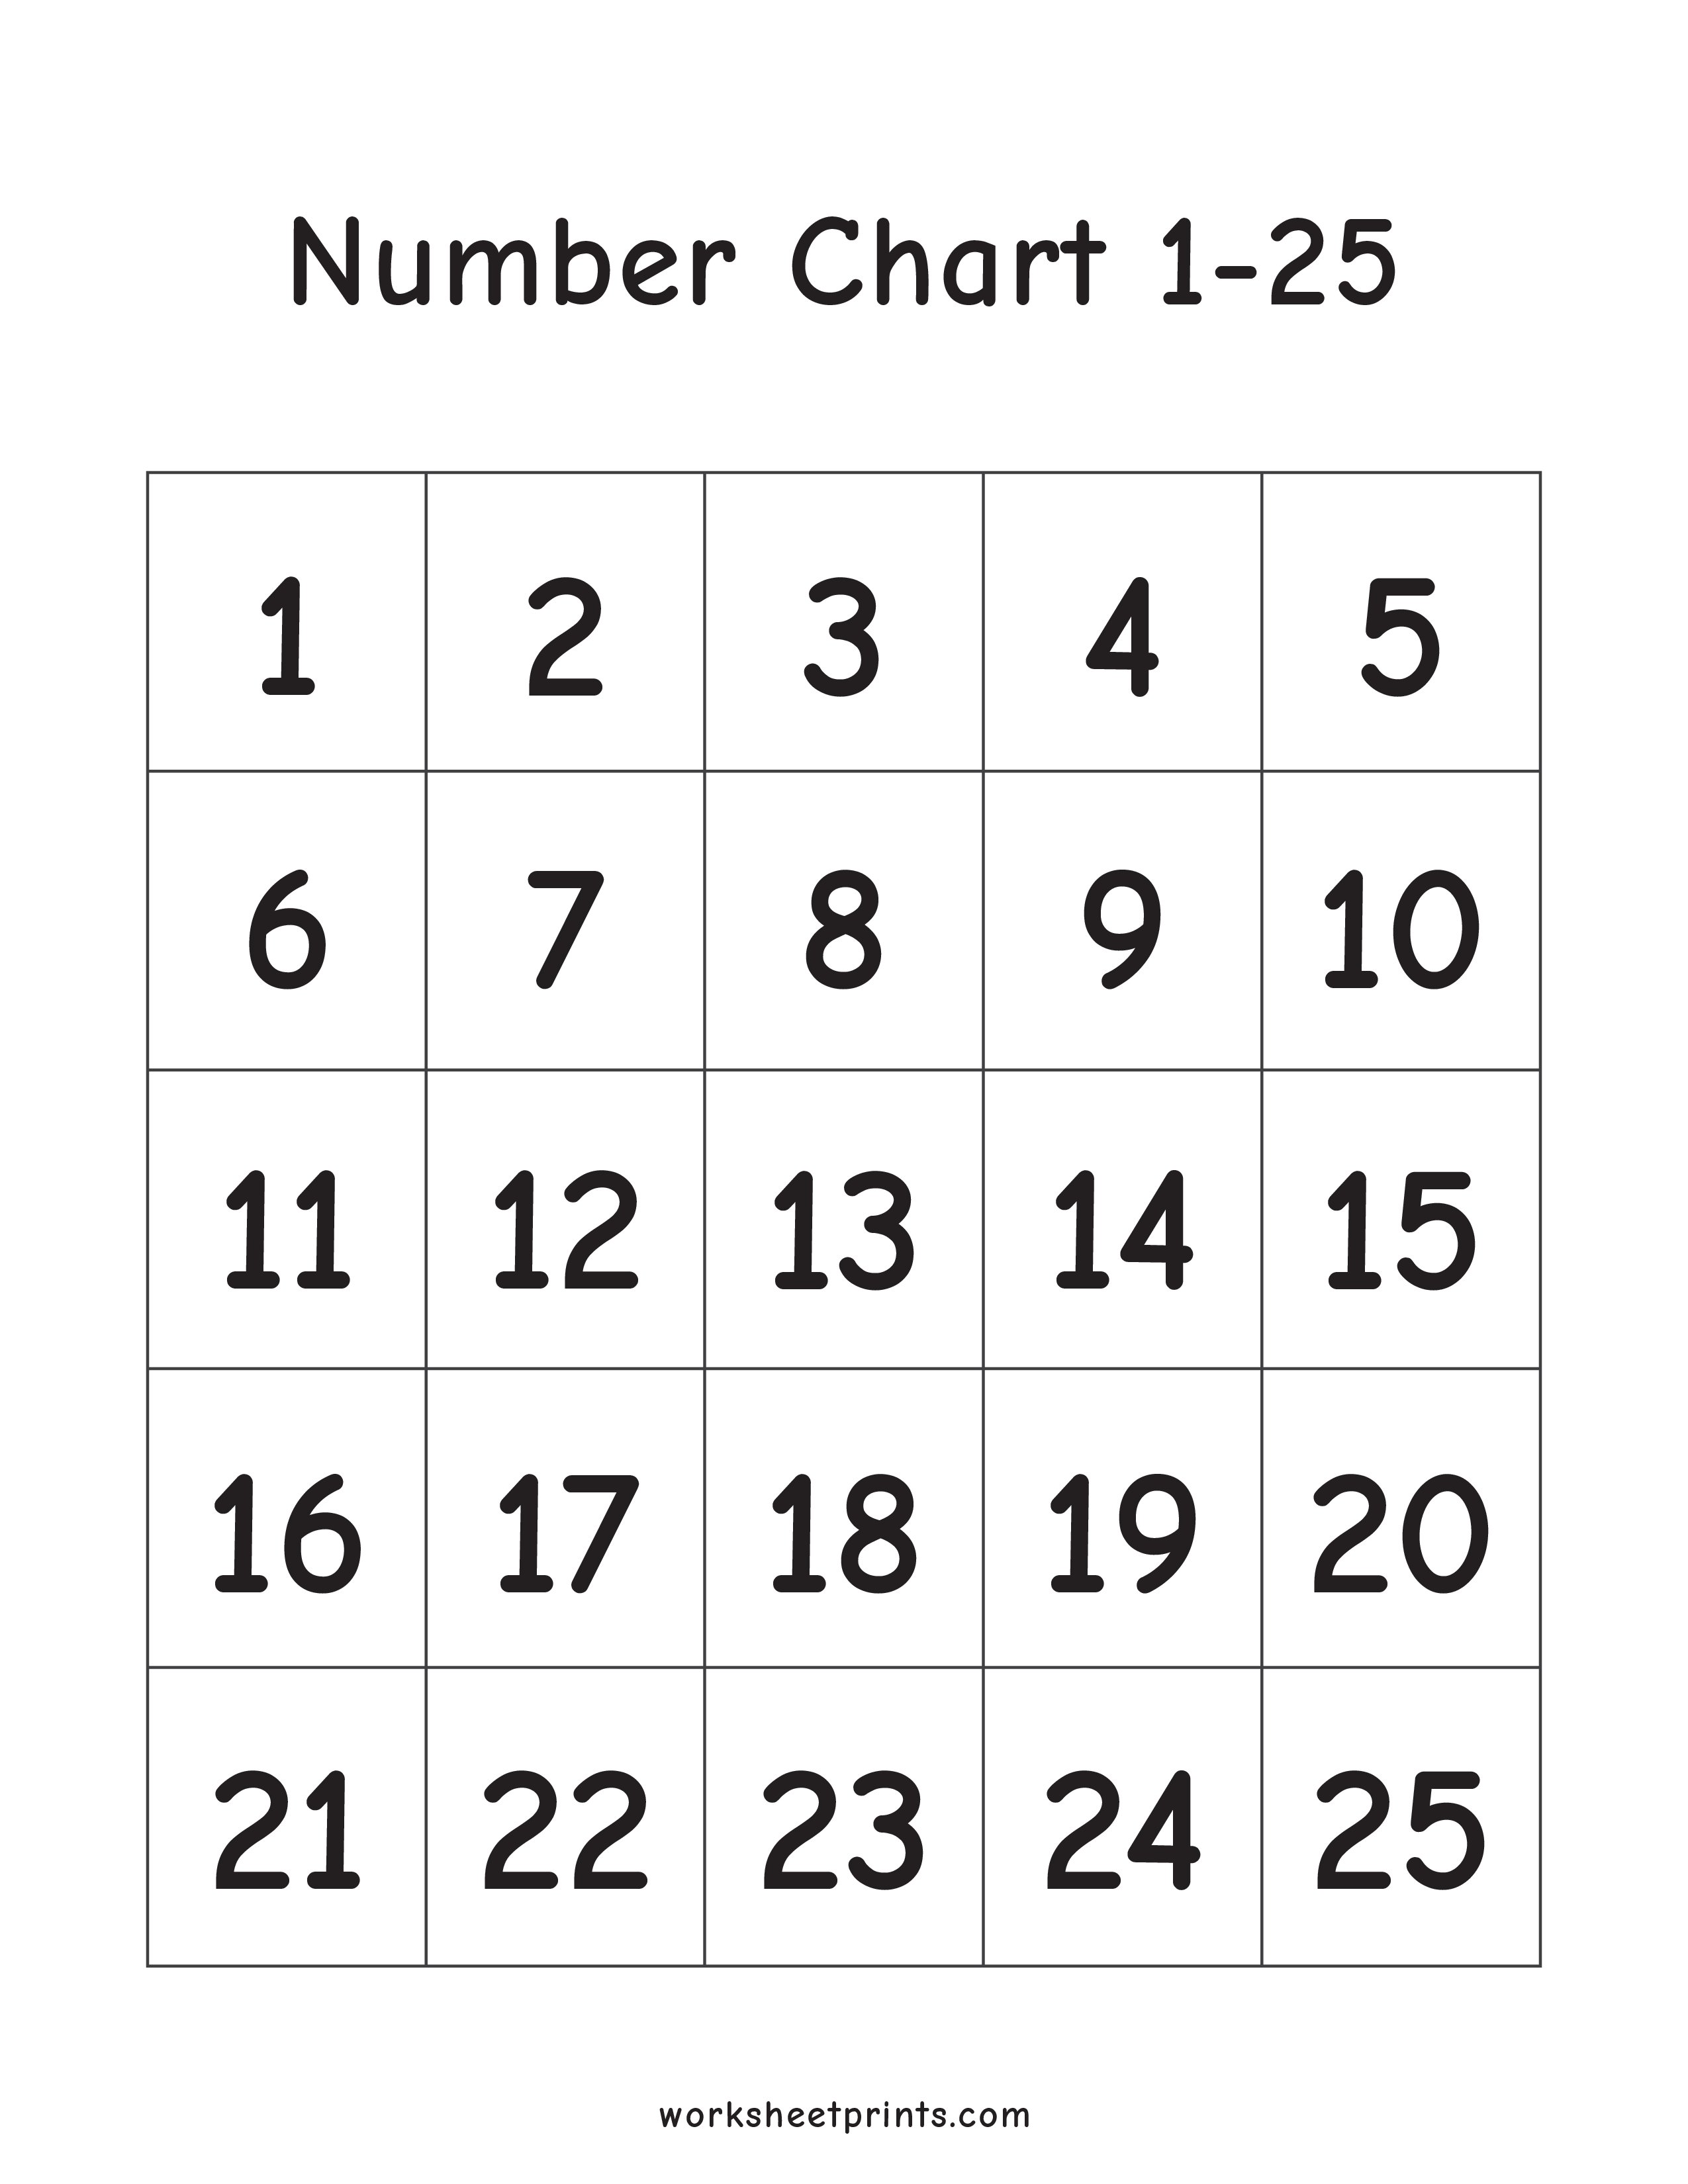 Number Charts 1-25